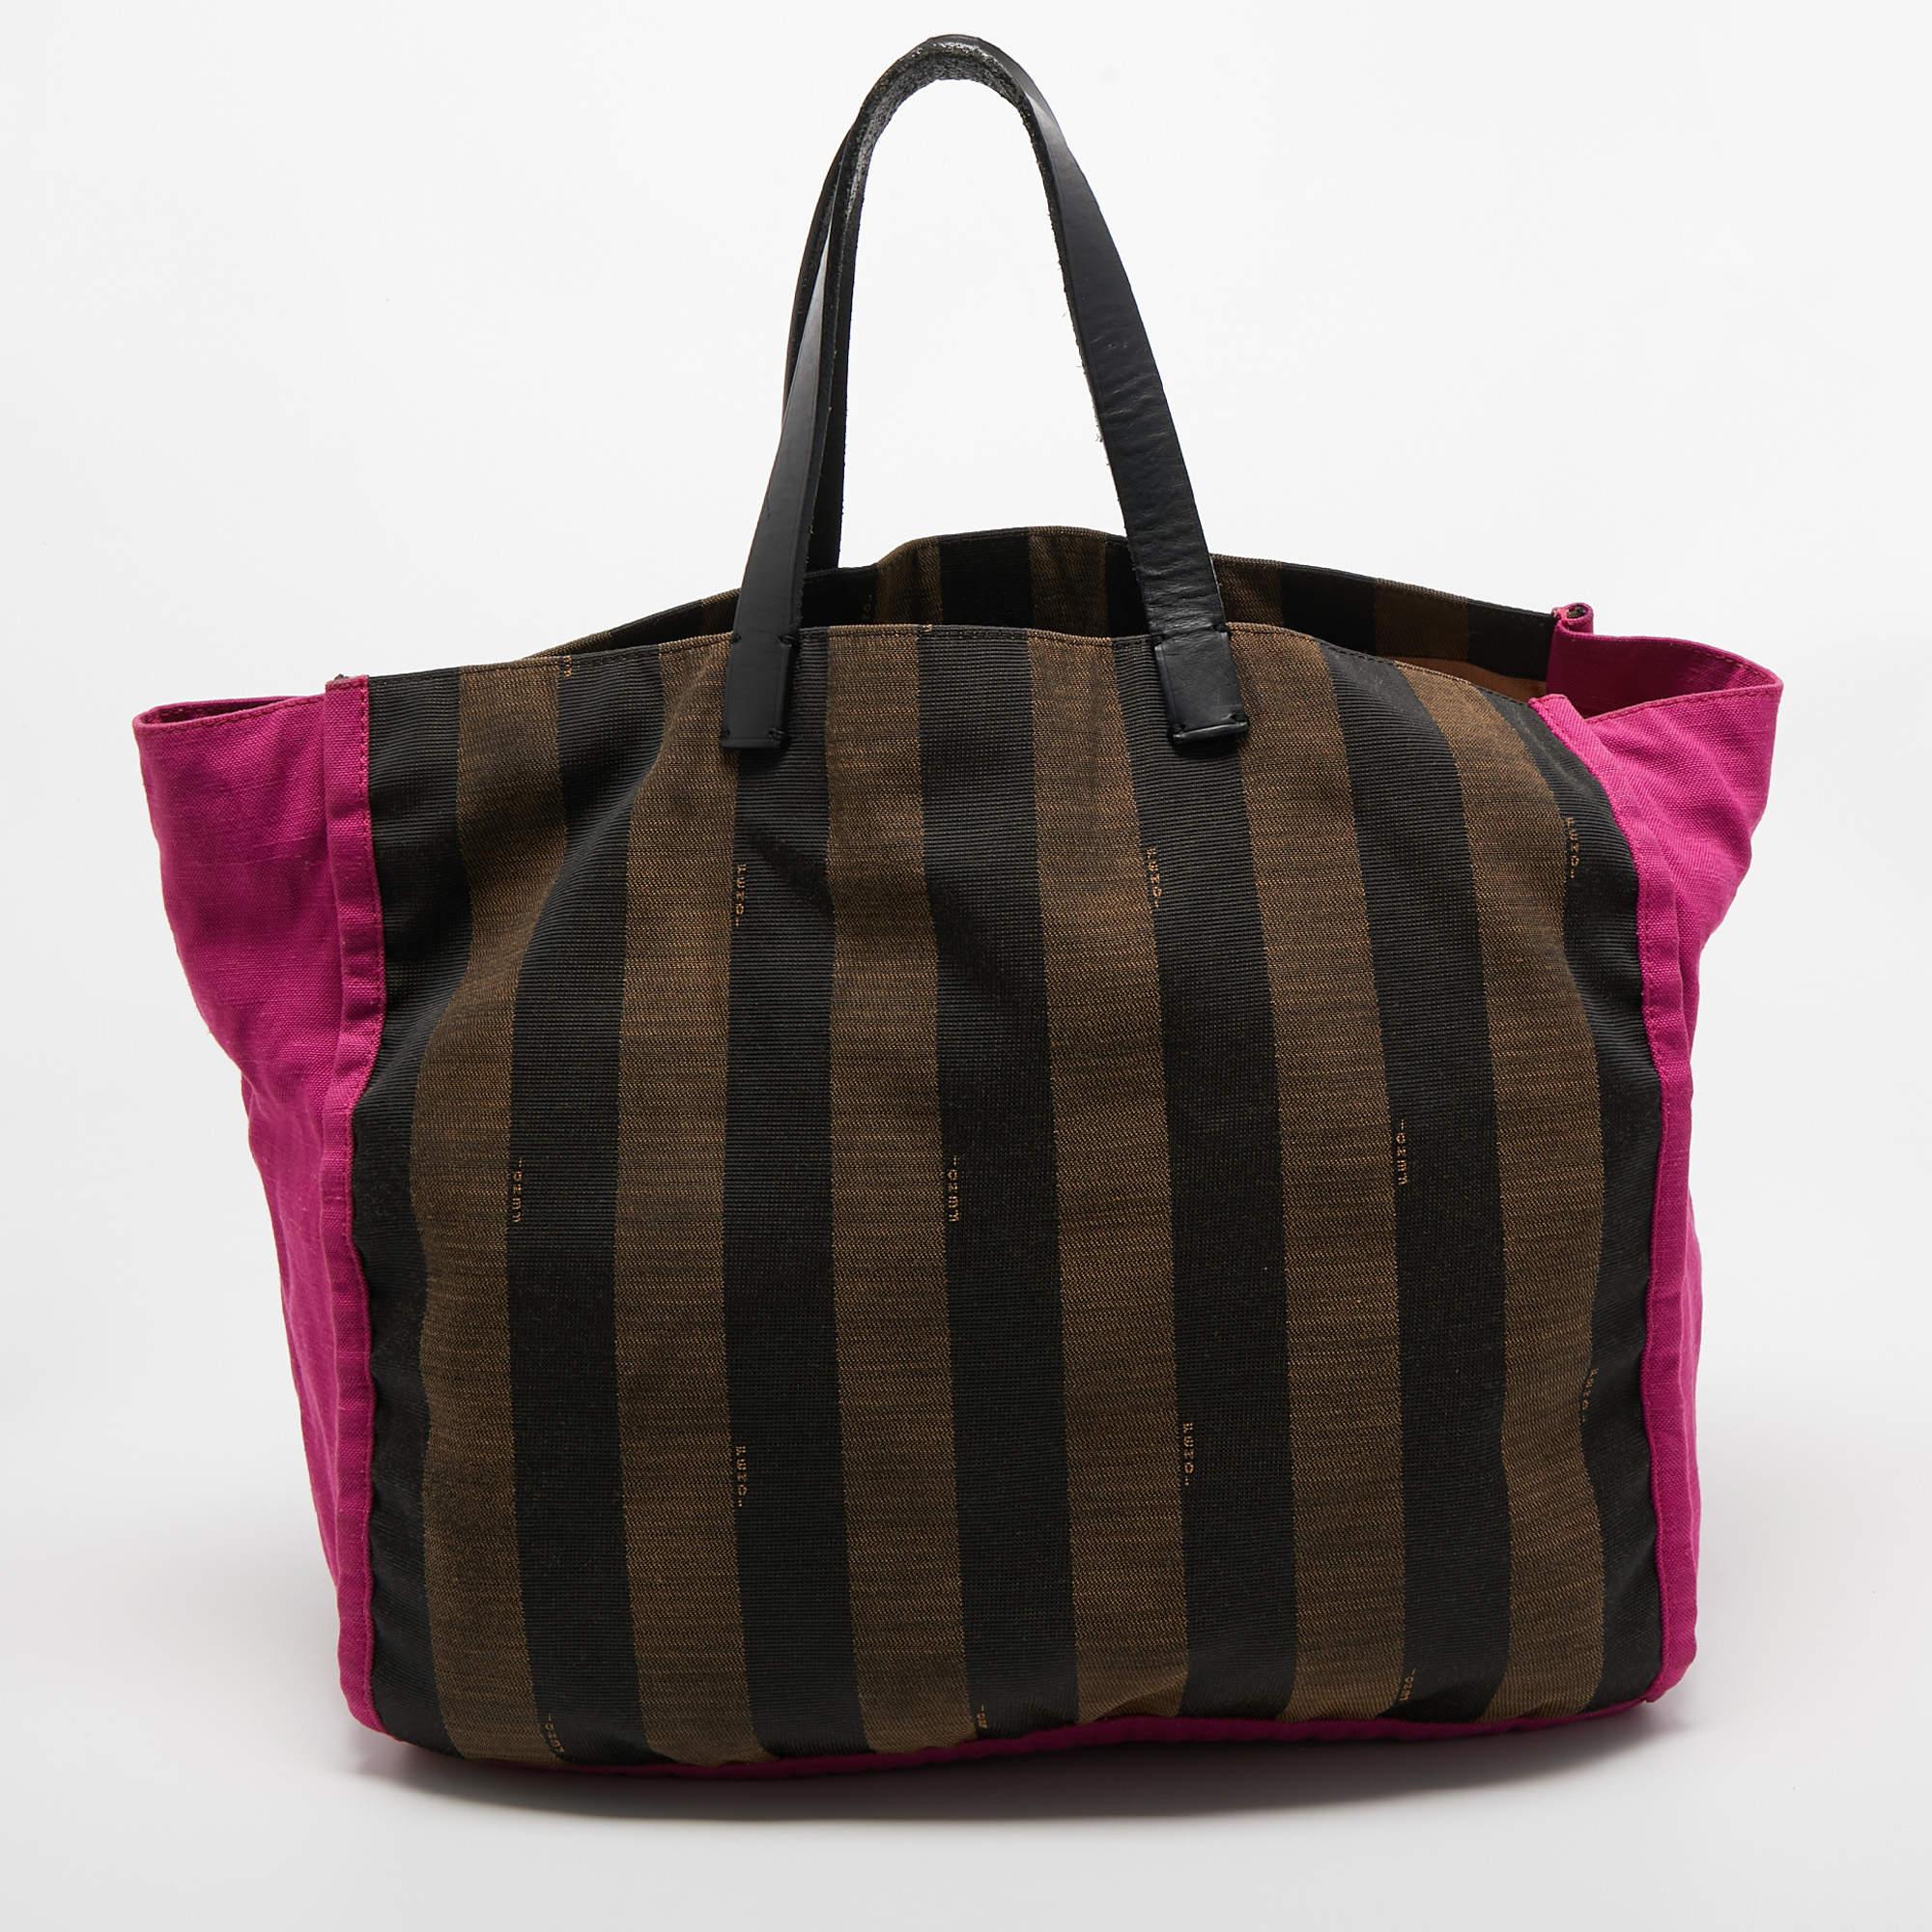 This tote is a result of blending high crafting skills with a practical design. It arrives with a durable exterior completed by luxe detailing. It is an accessory that you can count on.

Includes: Slim Pouch